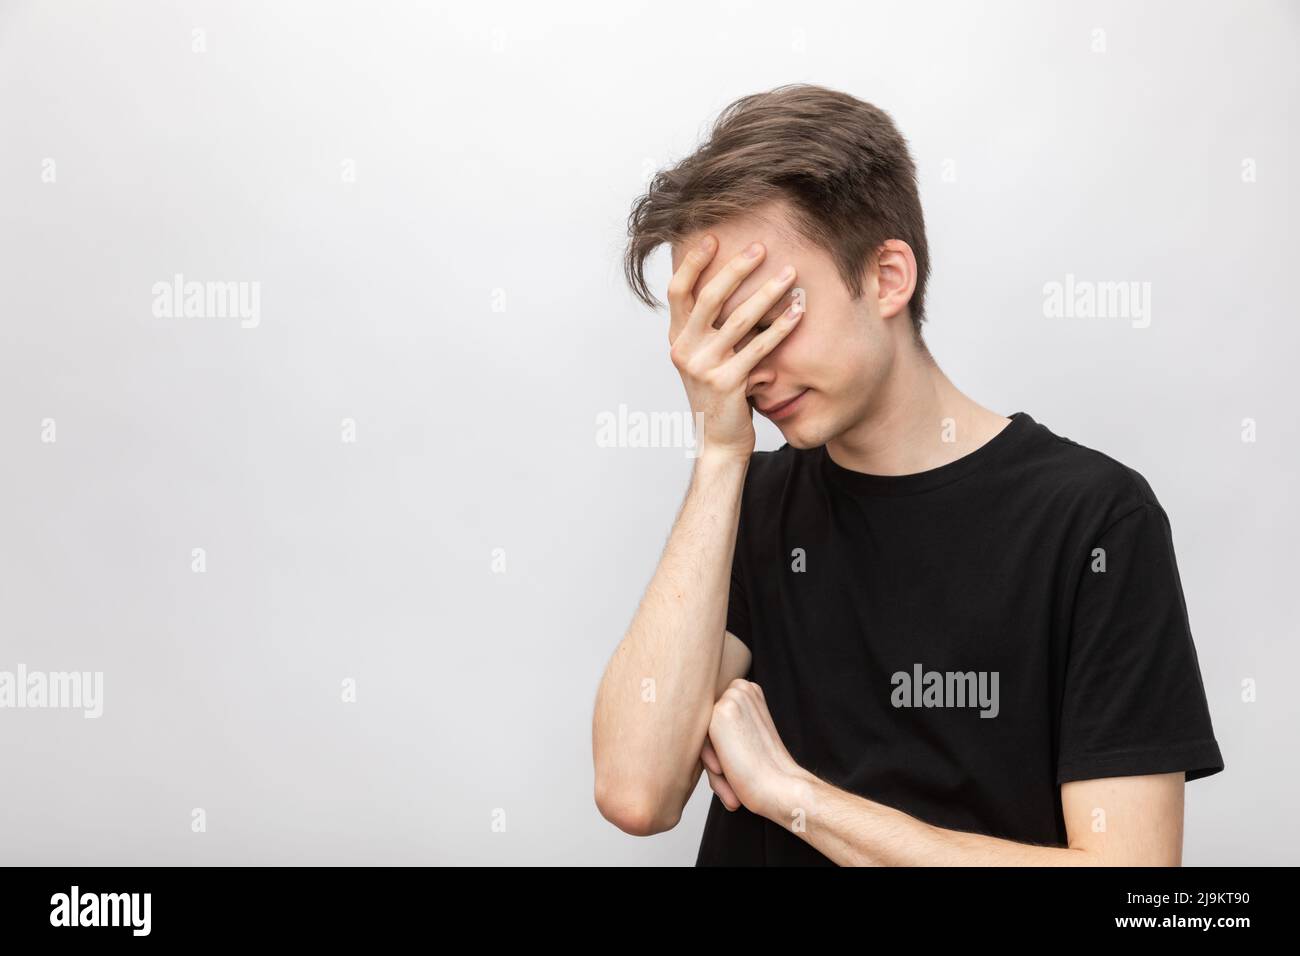 Portrait of young man wearing black tshirt covering his eyes and face with palm. Studio shot on gray background Stock Photo